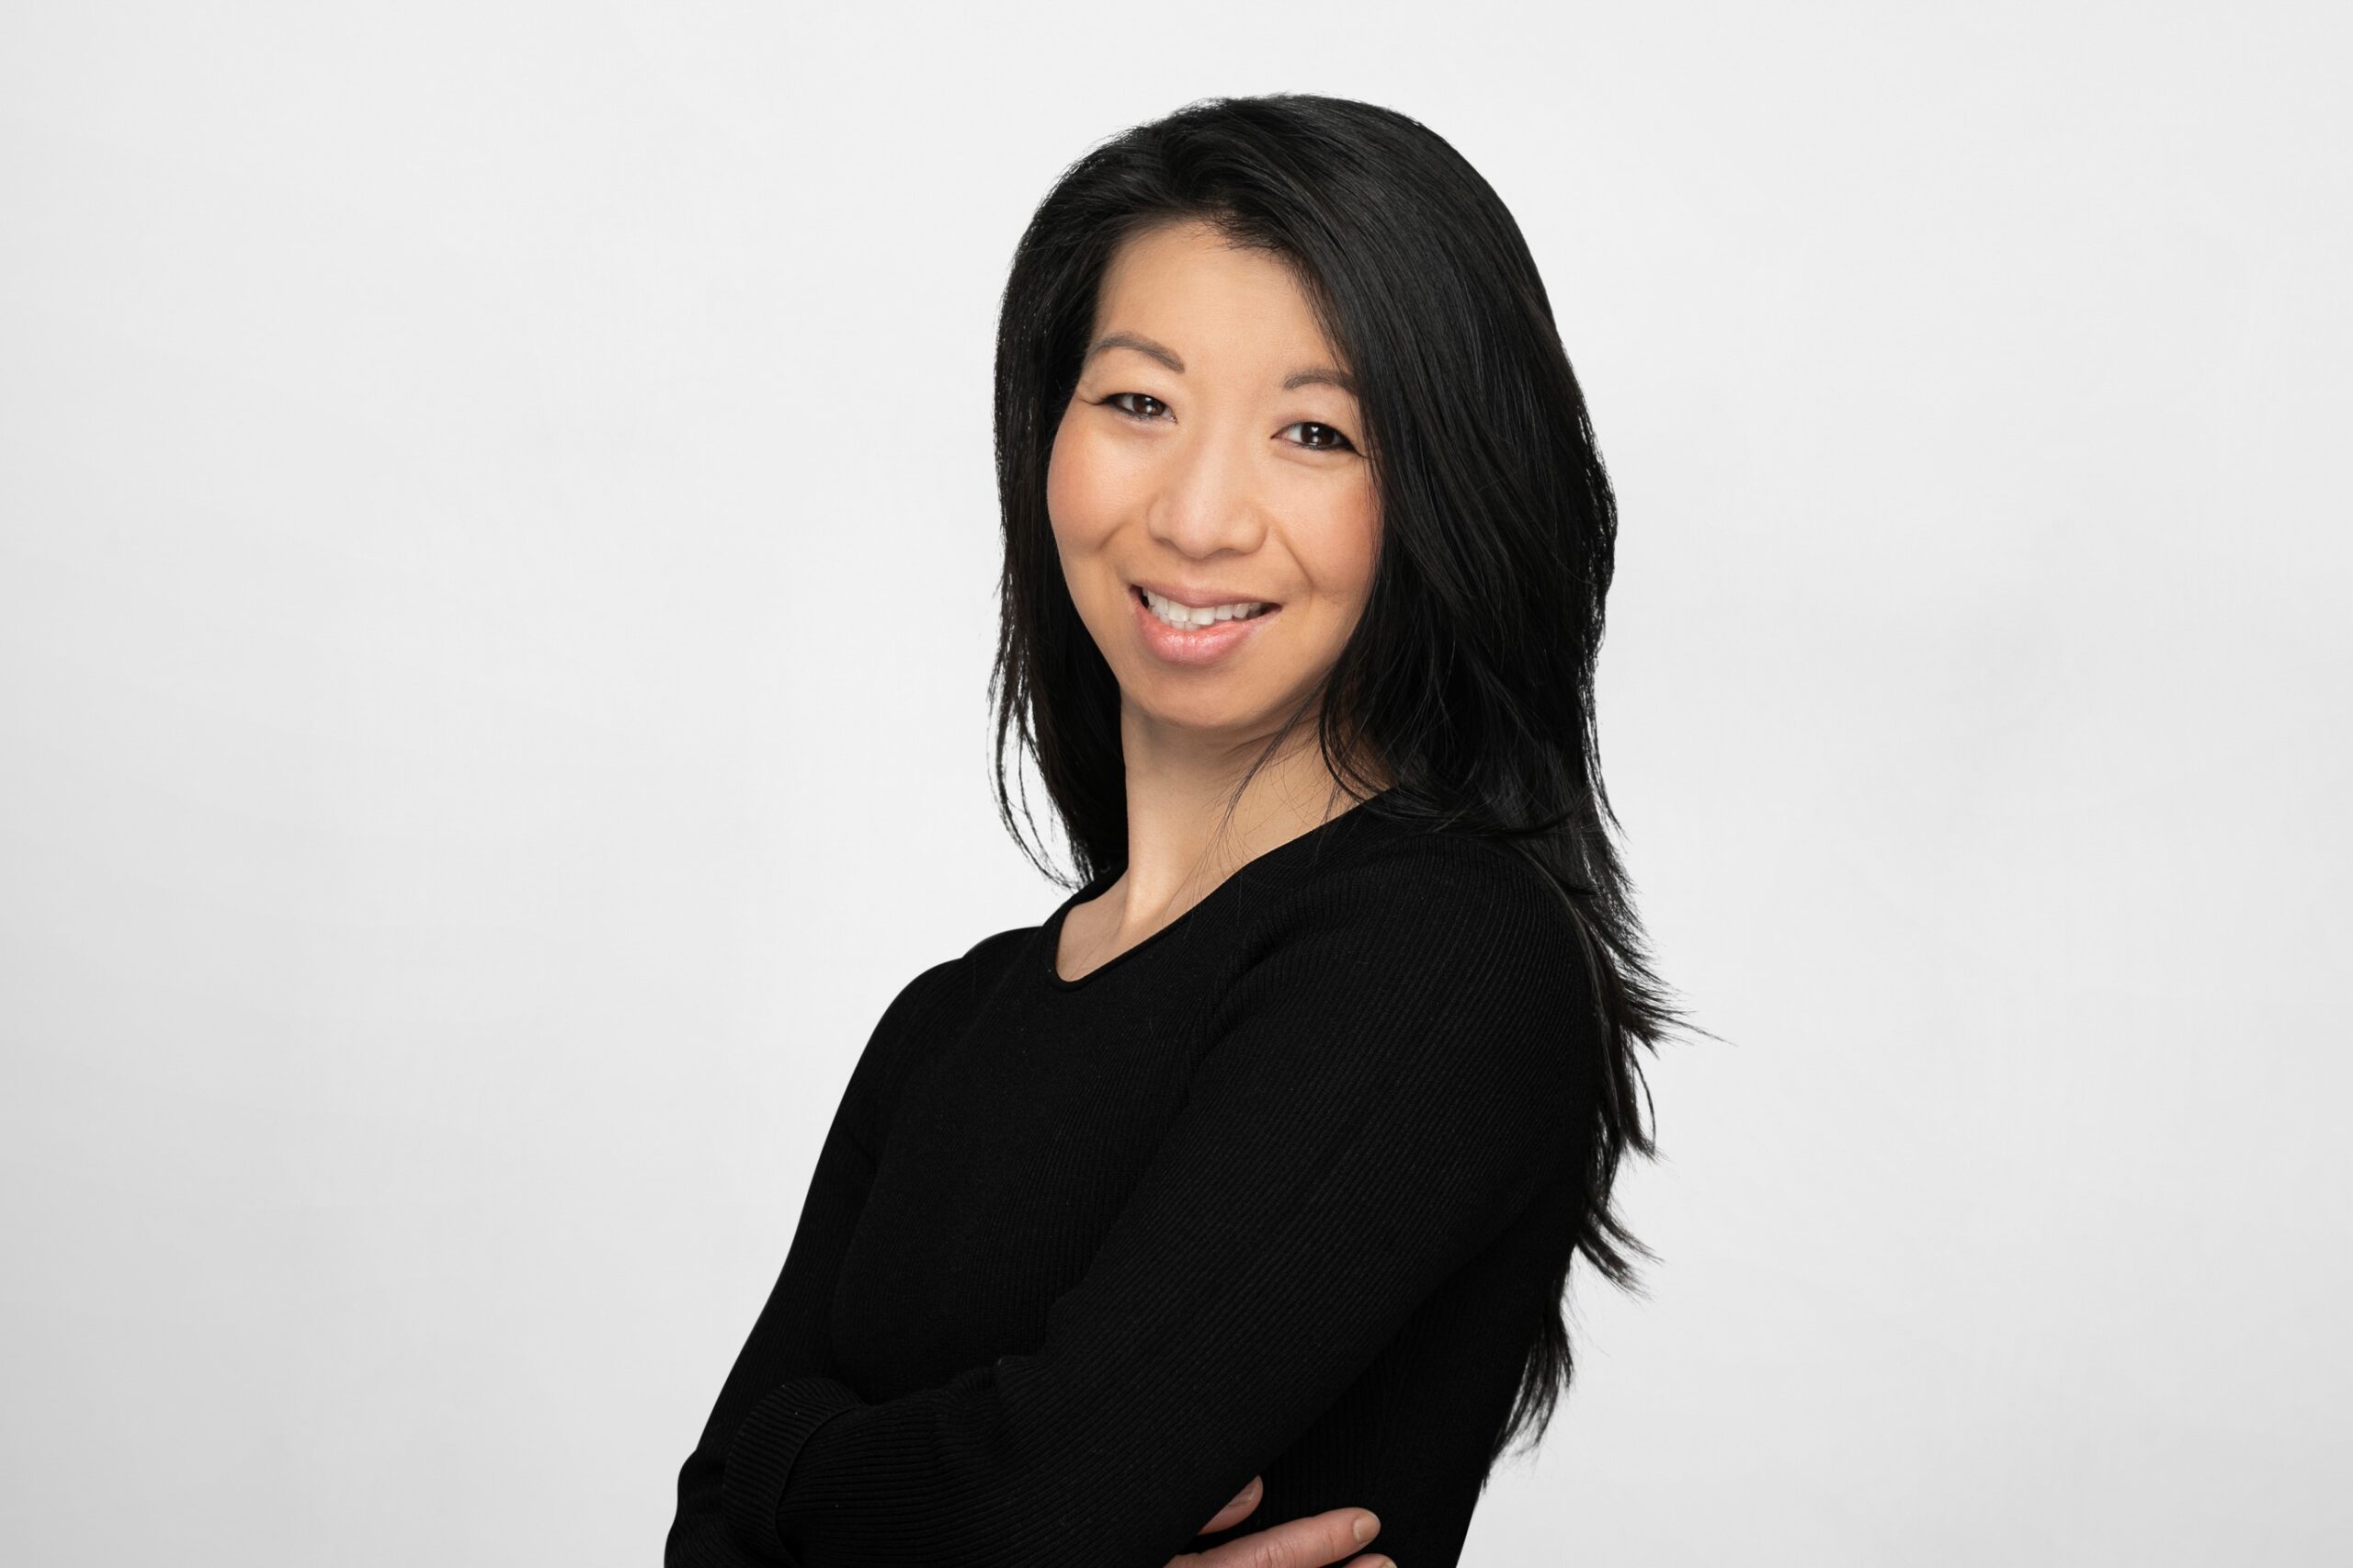 Empire State Realty Trust Appoints Christina Chiu as Executive Vice President, Chief Operating Officer & Chief Financial Officer